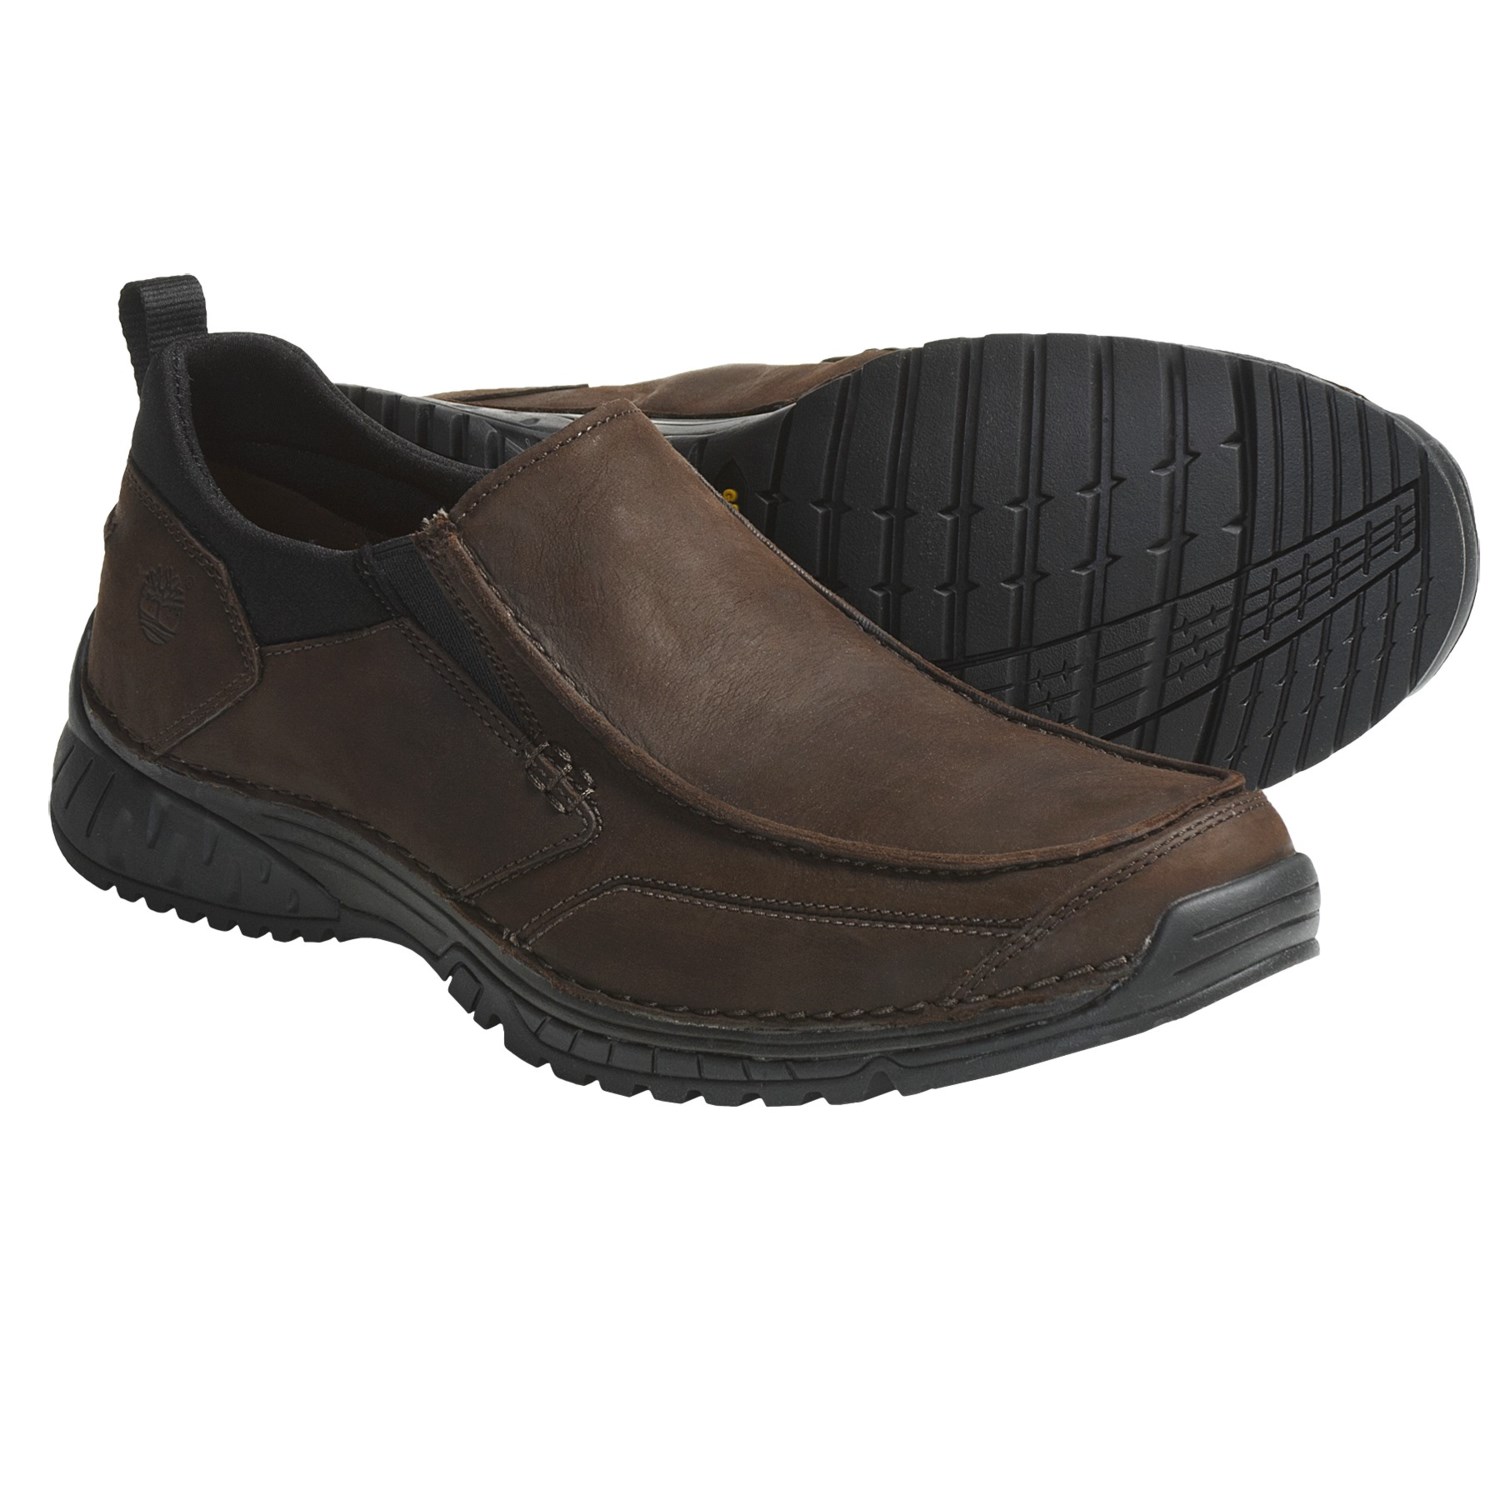 Timberland Earthkeepers City Endurance Shoes (For Men) 4794A - Save 34%